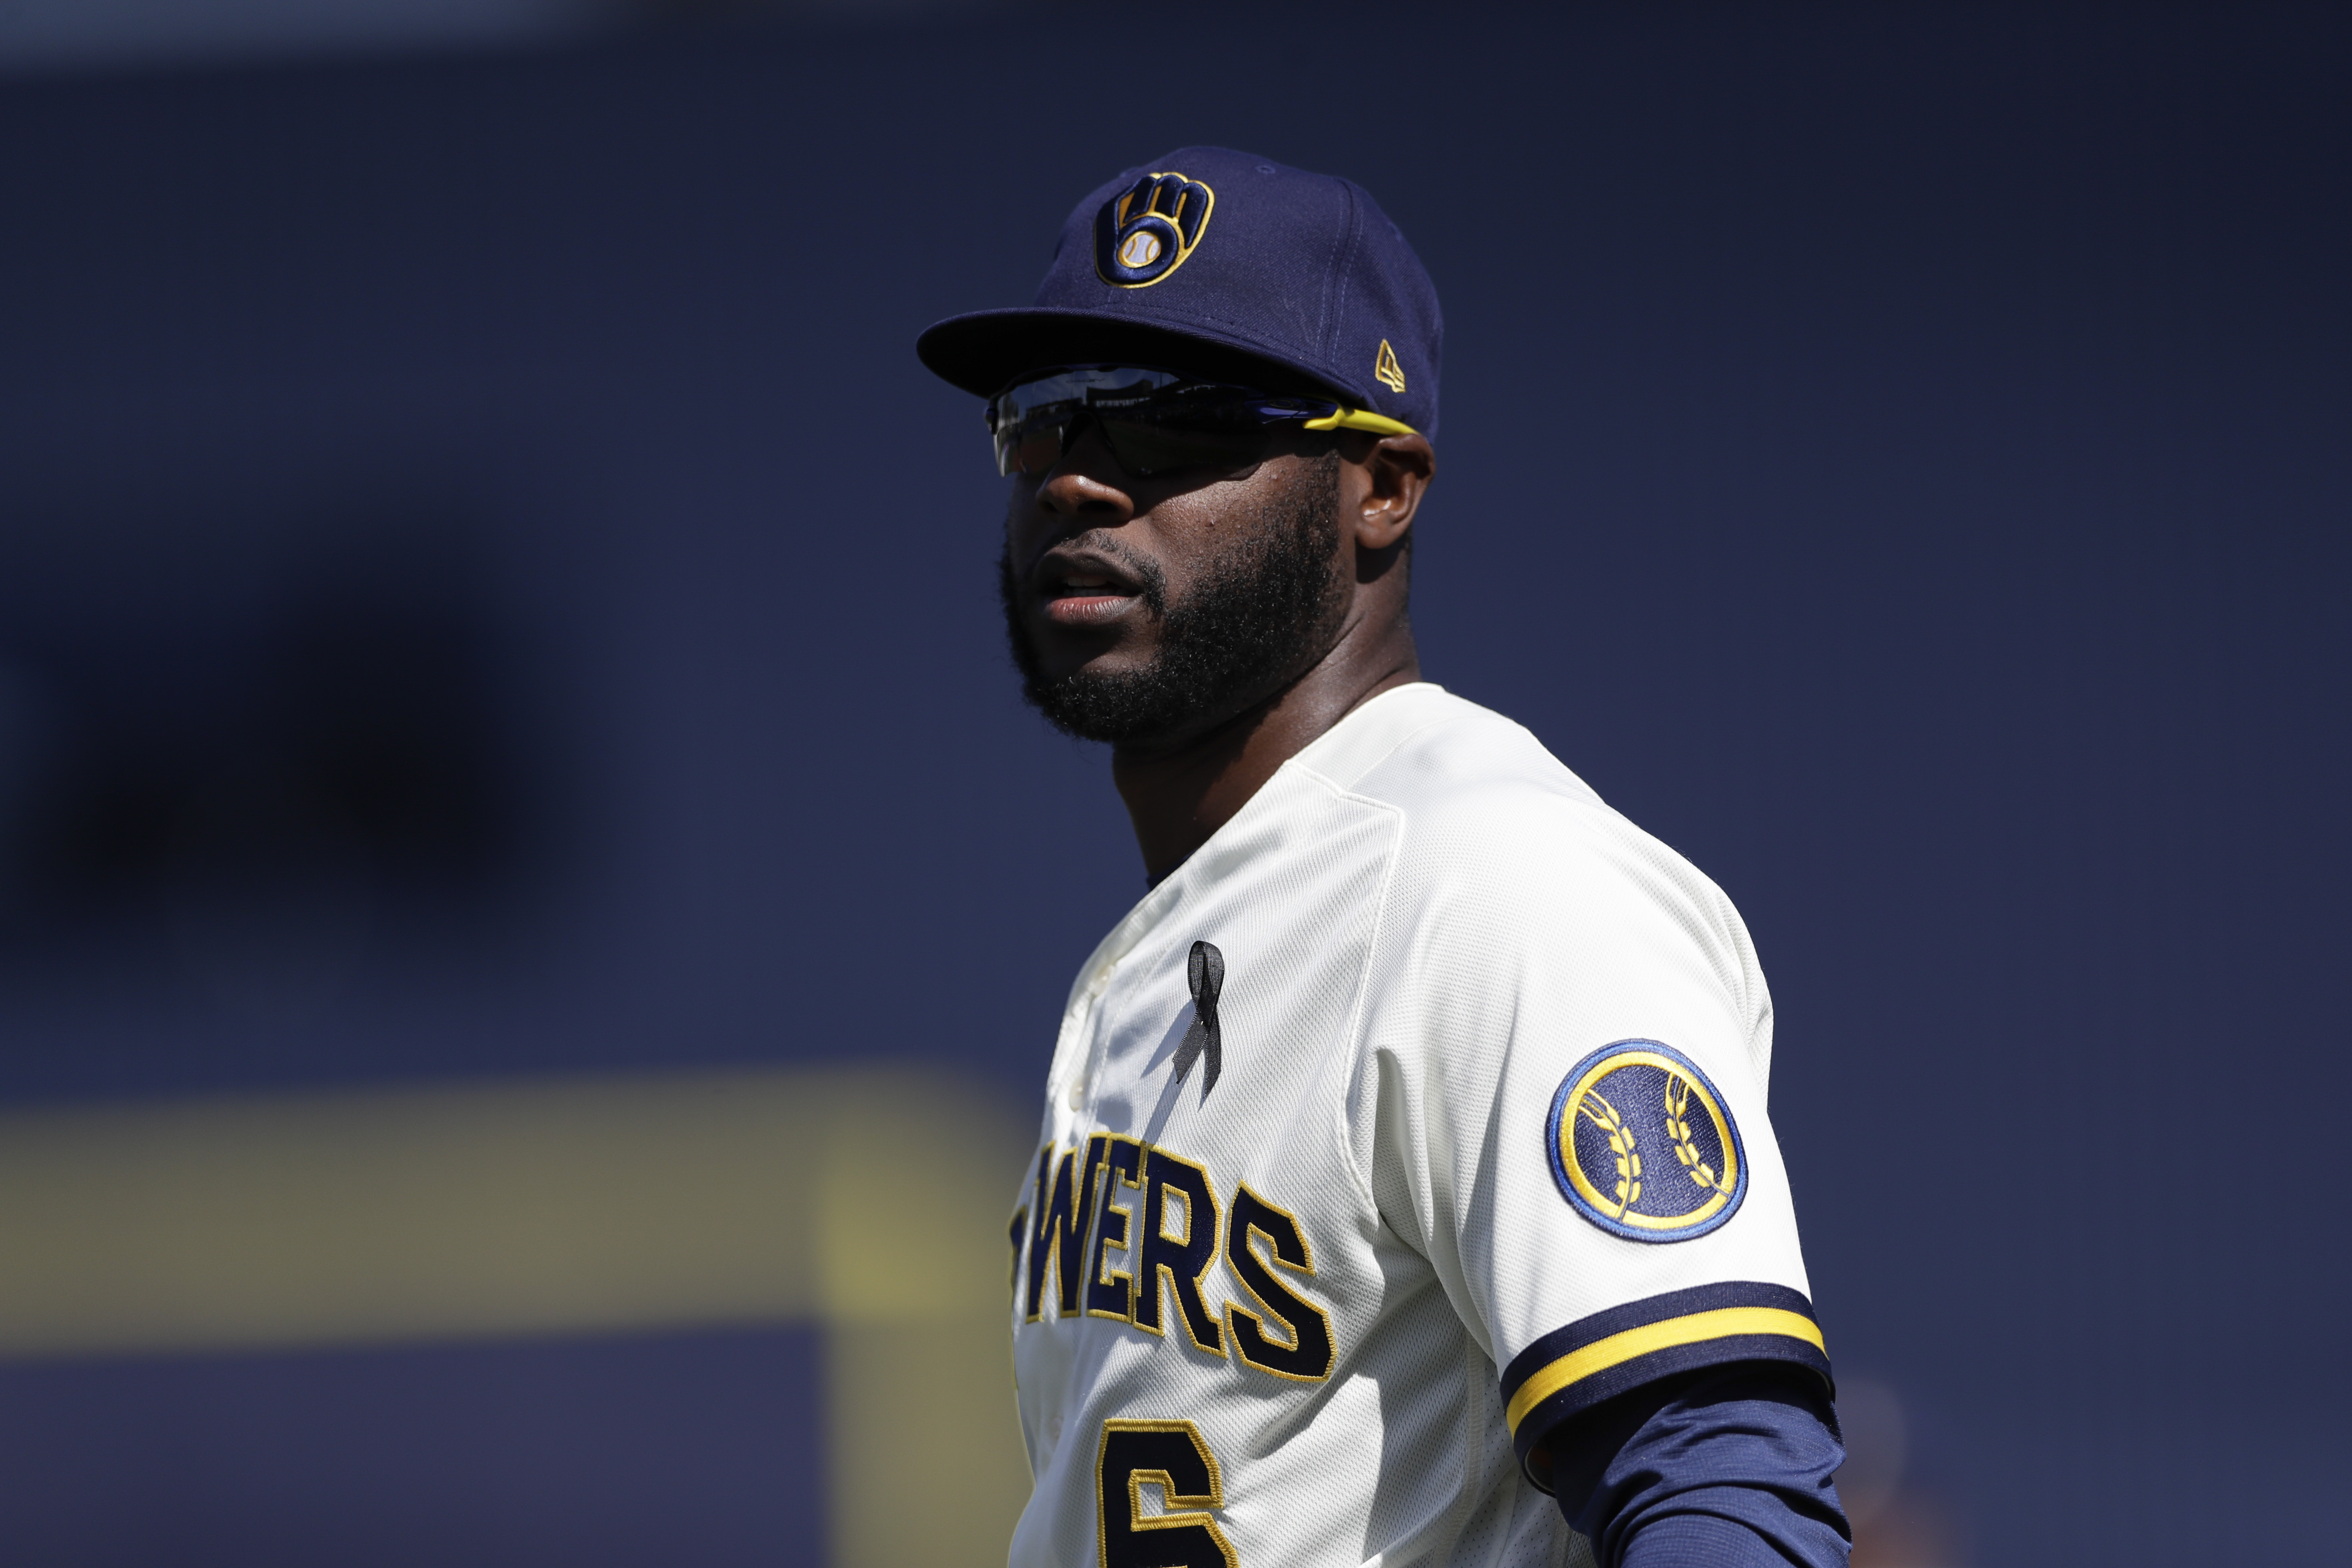 Brewers' Cain opts out of 2020 season; series with Cardinals called off